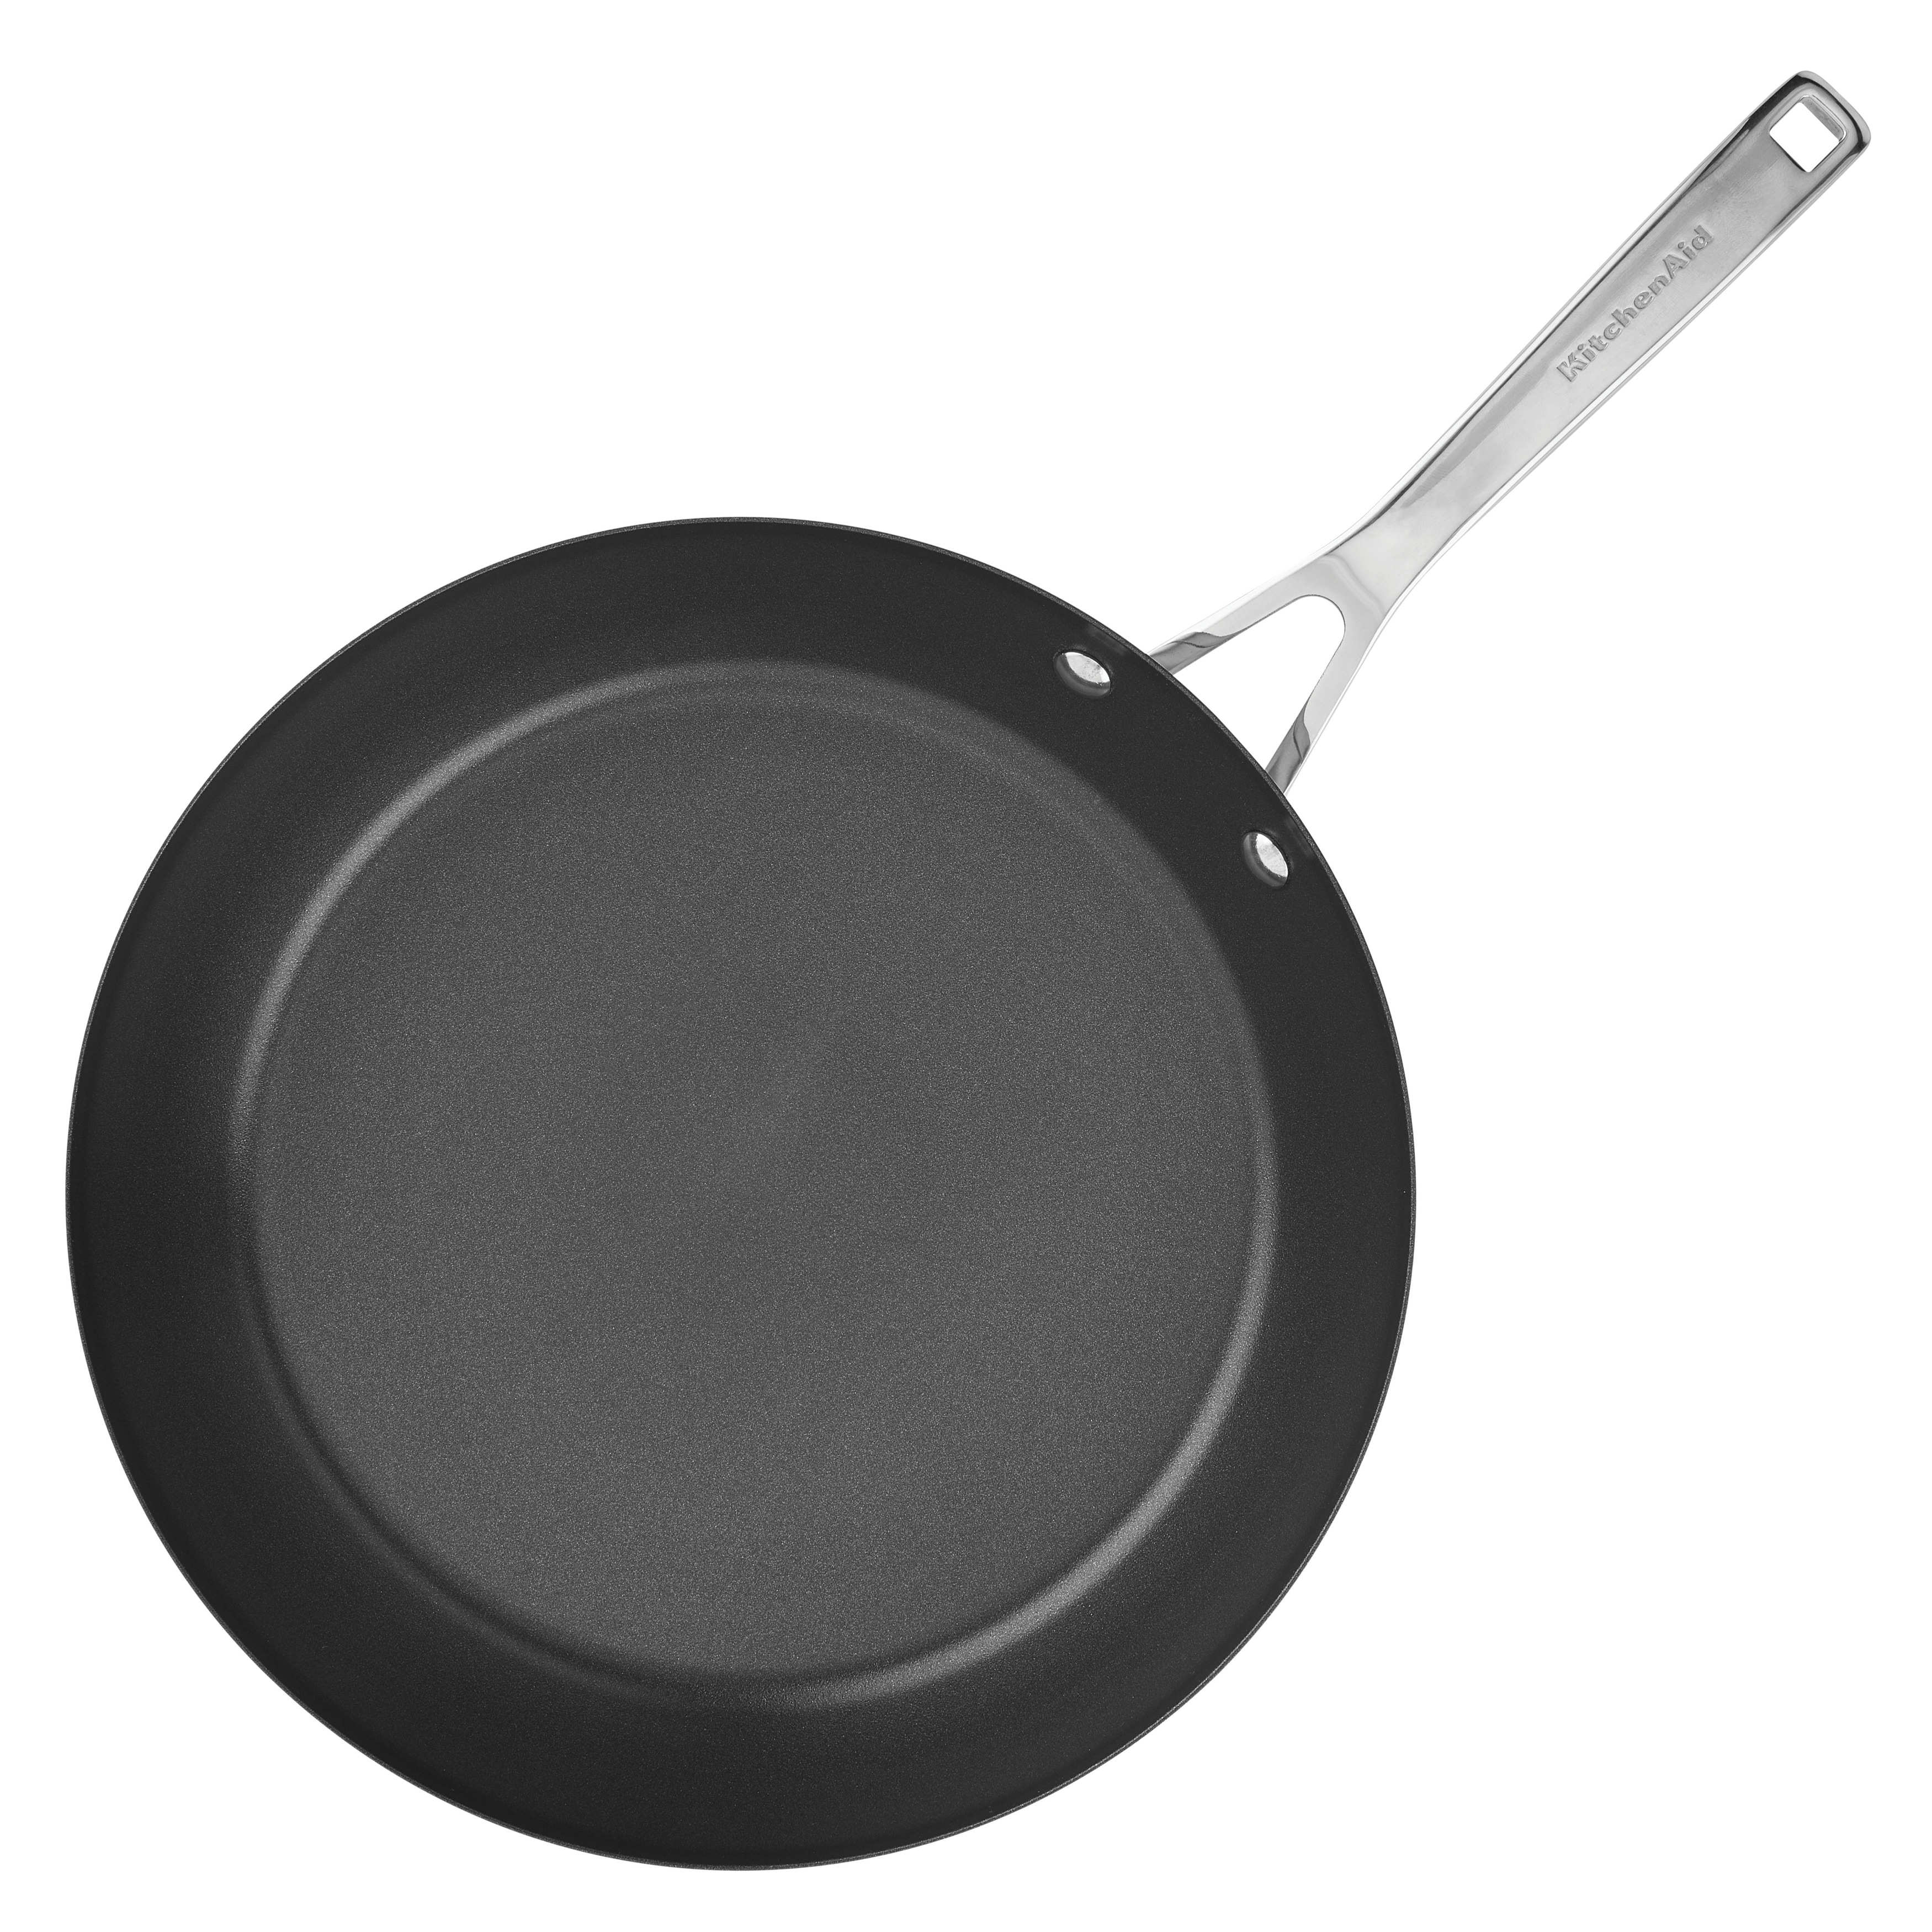 https://ak1.ostkcdn.com/images/products/is/images/direct/037299b45f4bc0611006ffcc666cb1a37124c119/KitchenAid-3-Ply-Base-Stainless-Steel-Nonstick-Induction-Frying-Pan%2C-12-Inch%2C-Brushed-Stainless-Steel.jpg